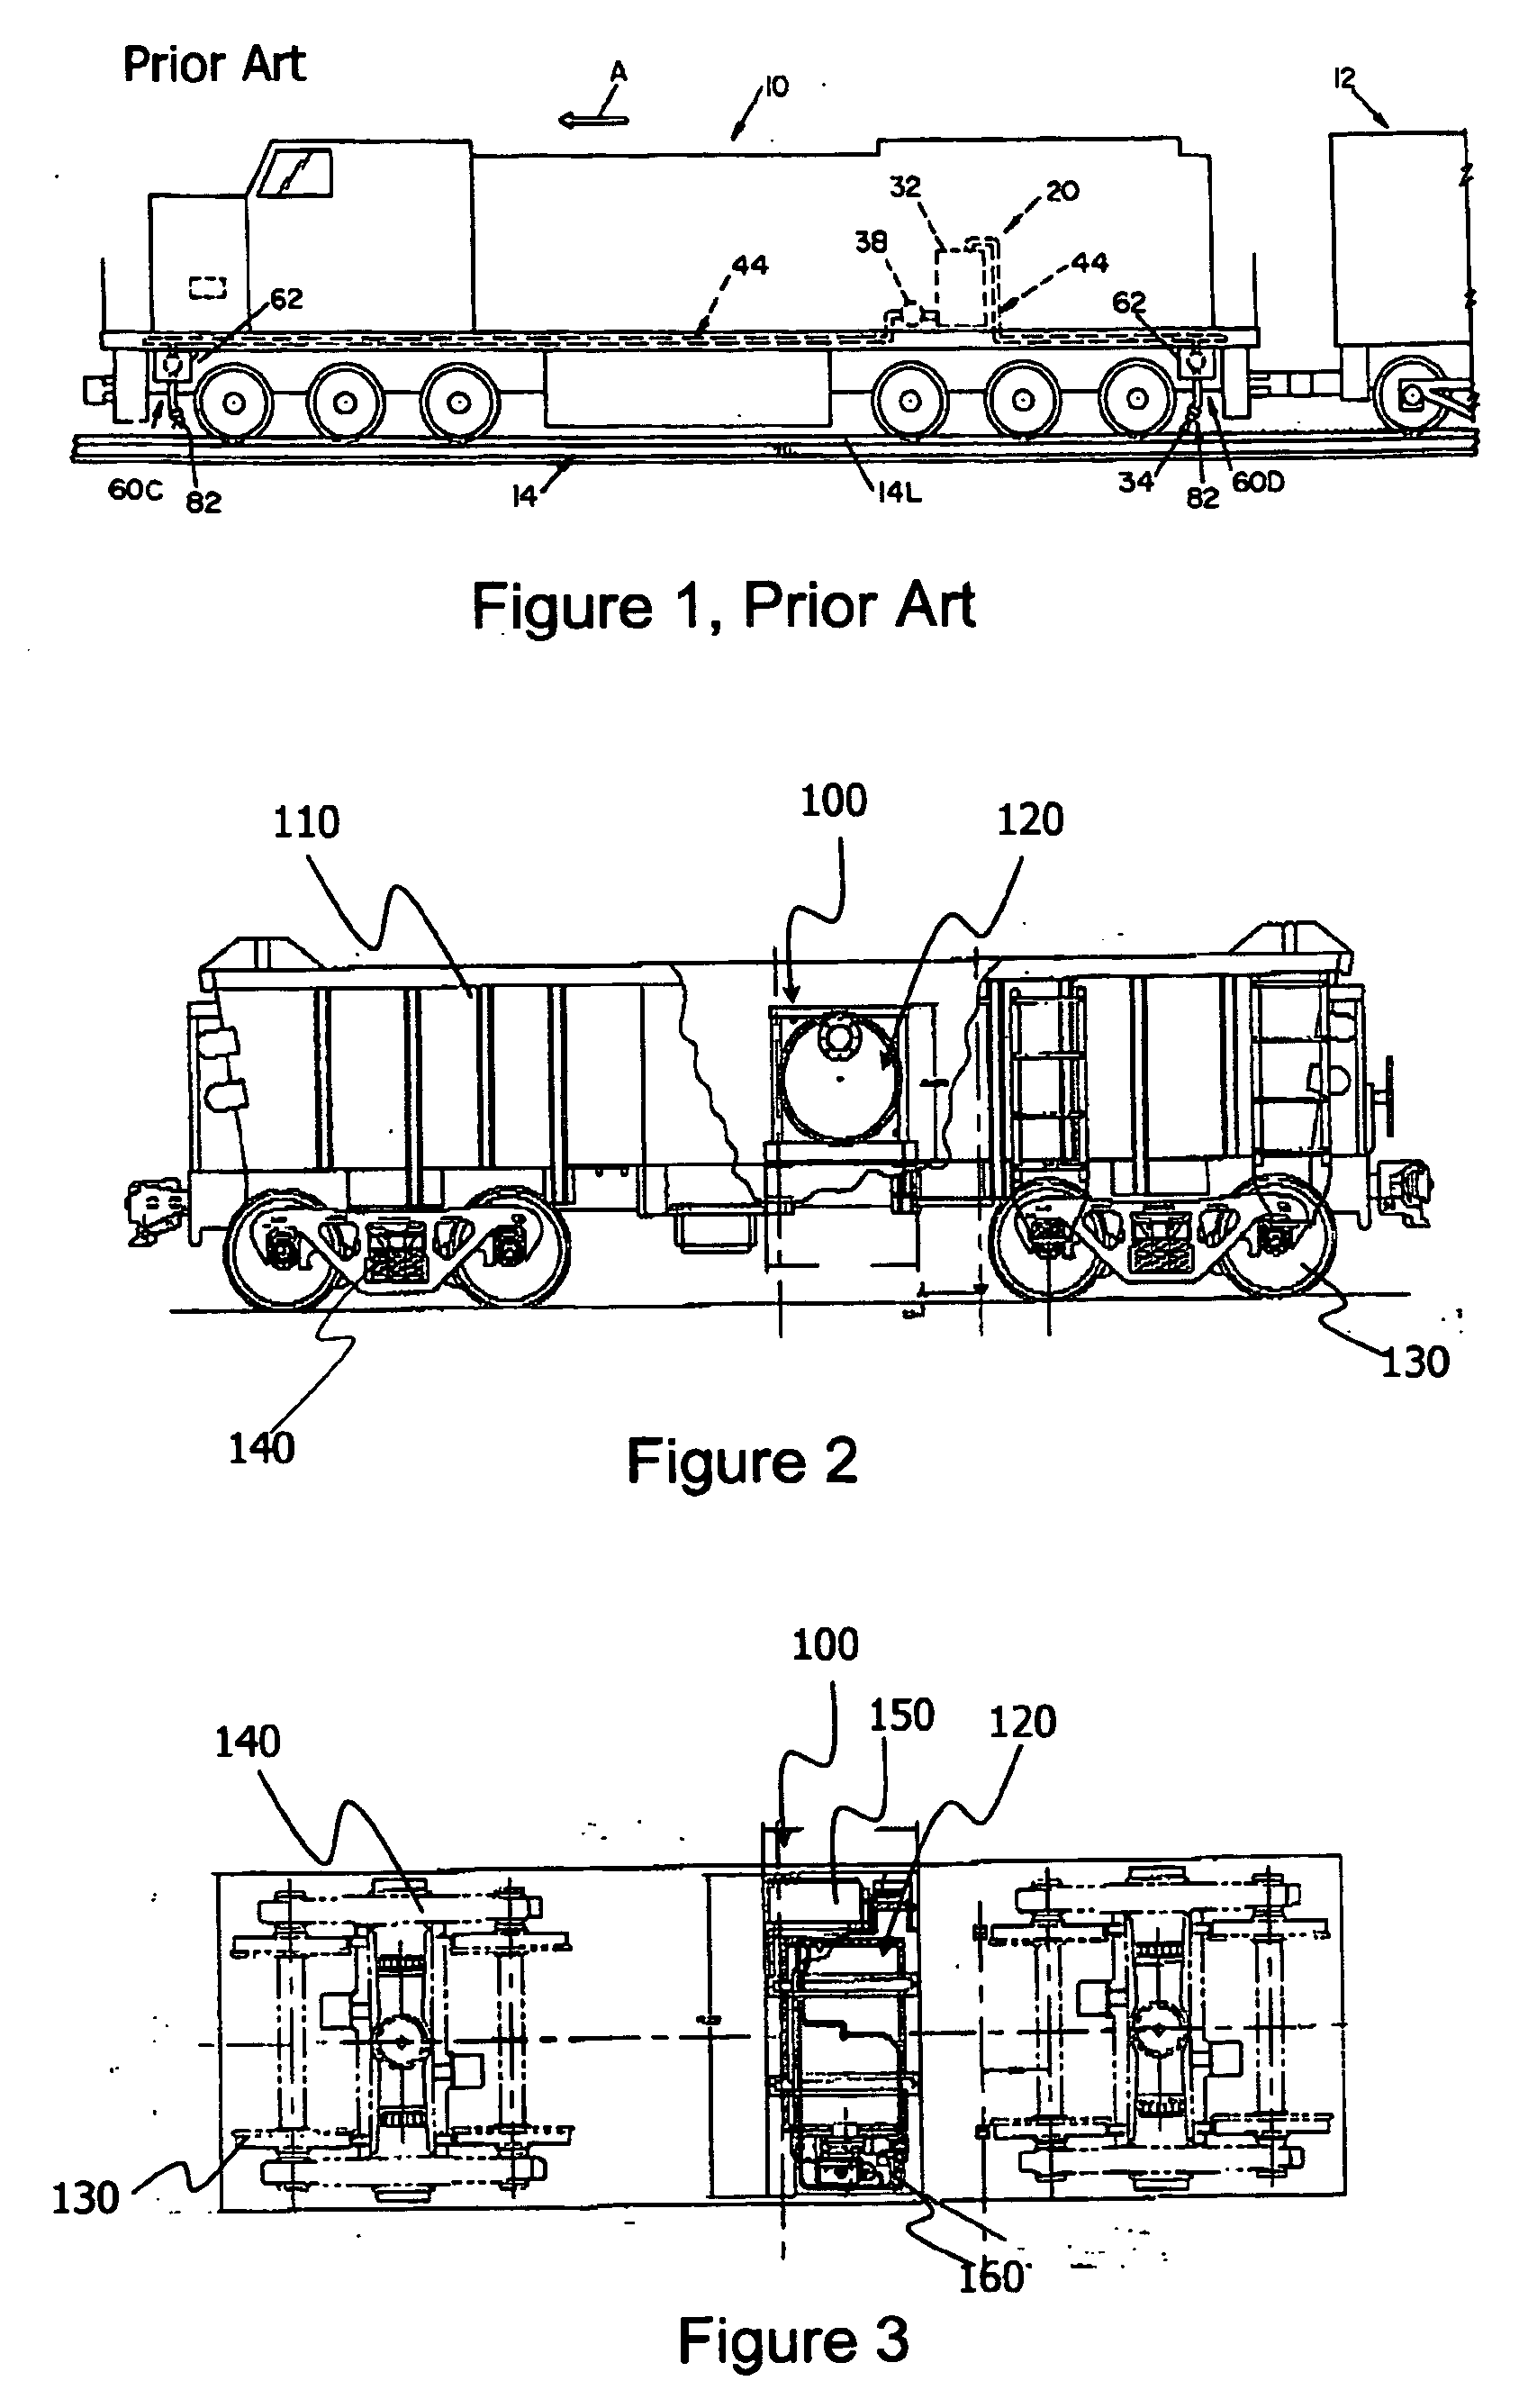 Method And Apparatus For Applying Liquid Compositions In Rail Systems